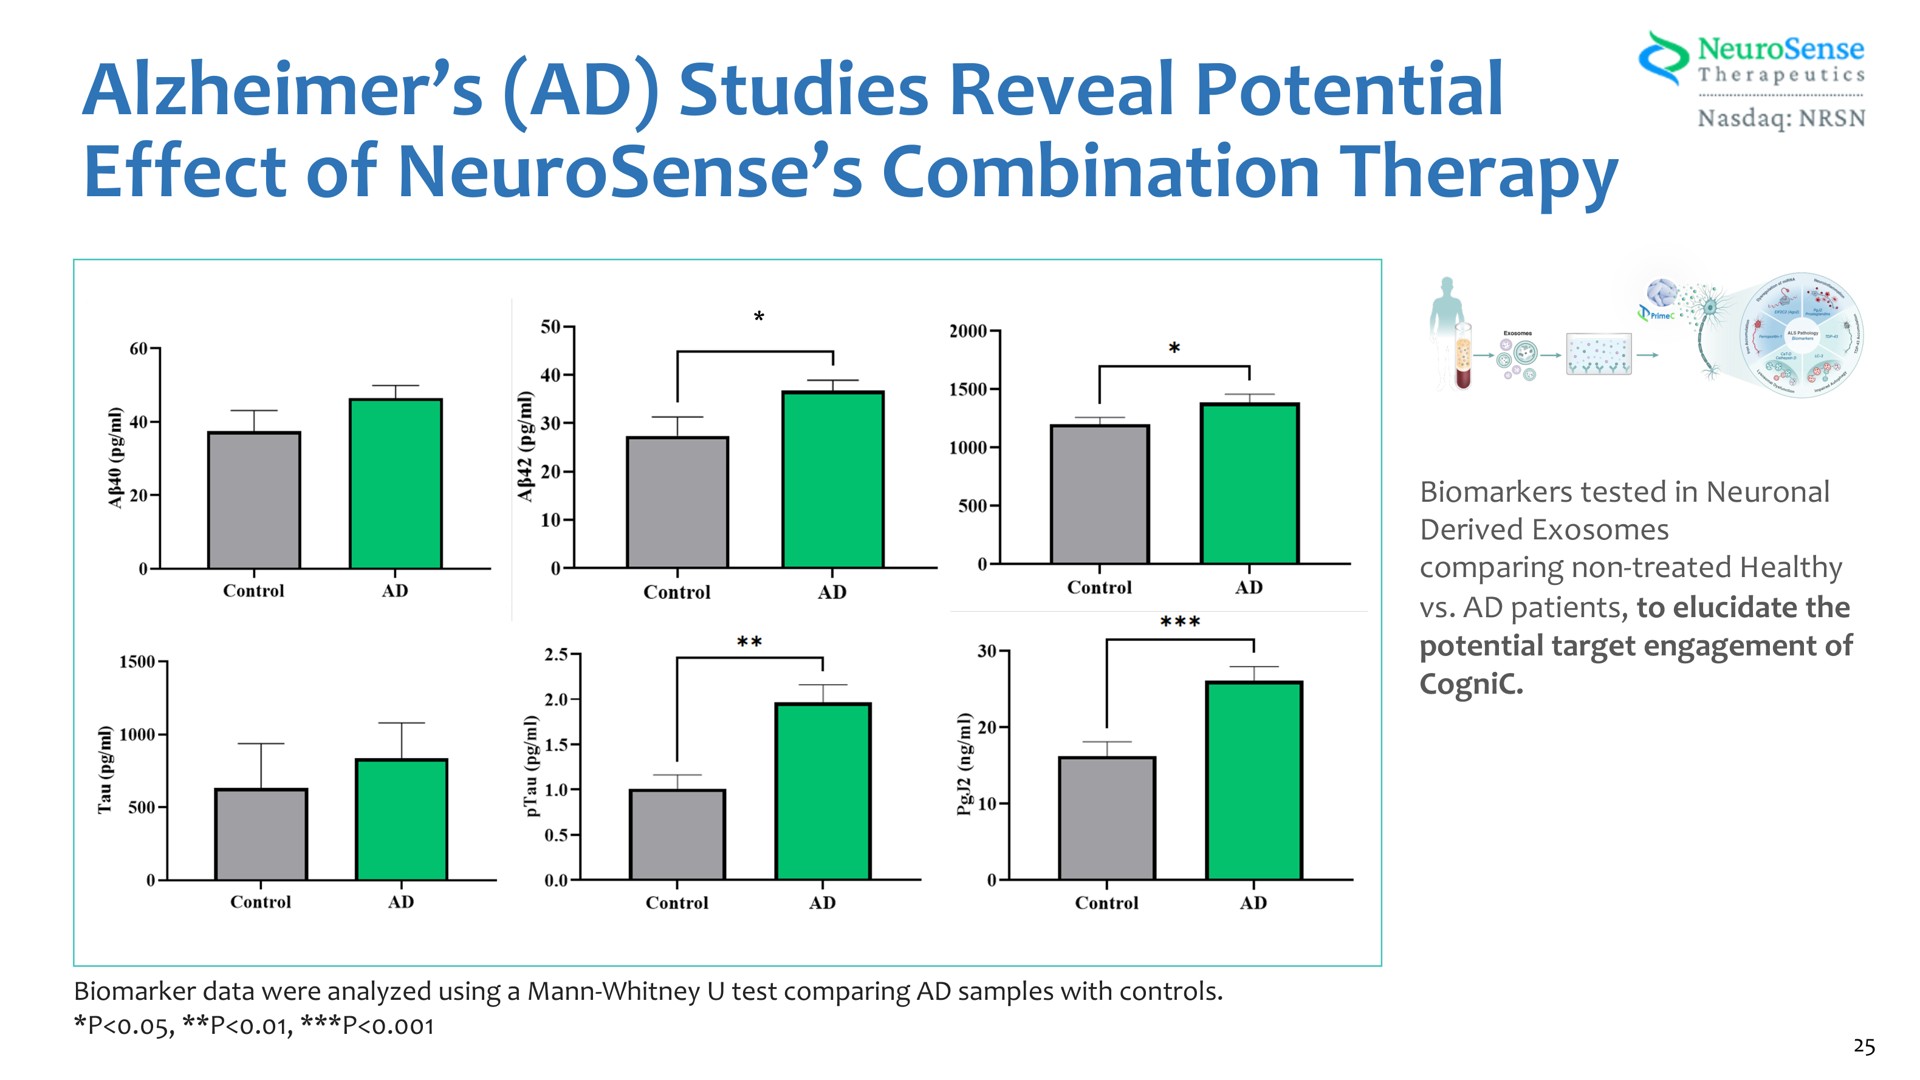 studies reveal potential effect of combination therapy | NeuroSense Therapeutics